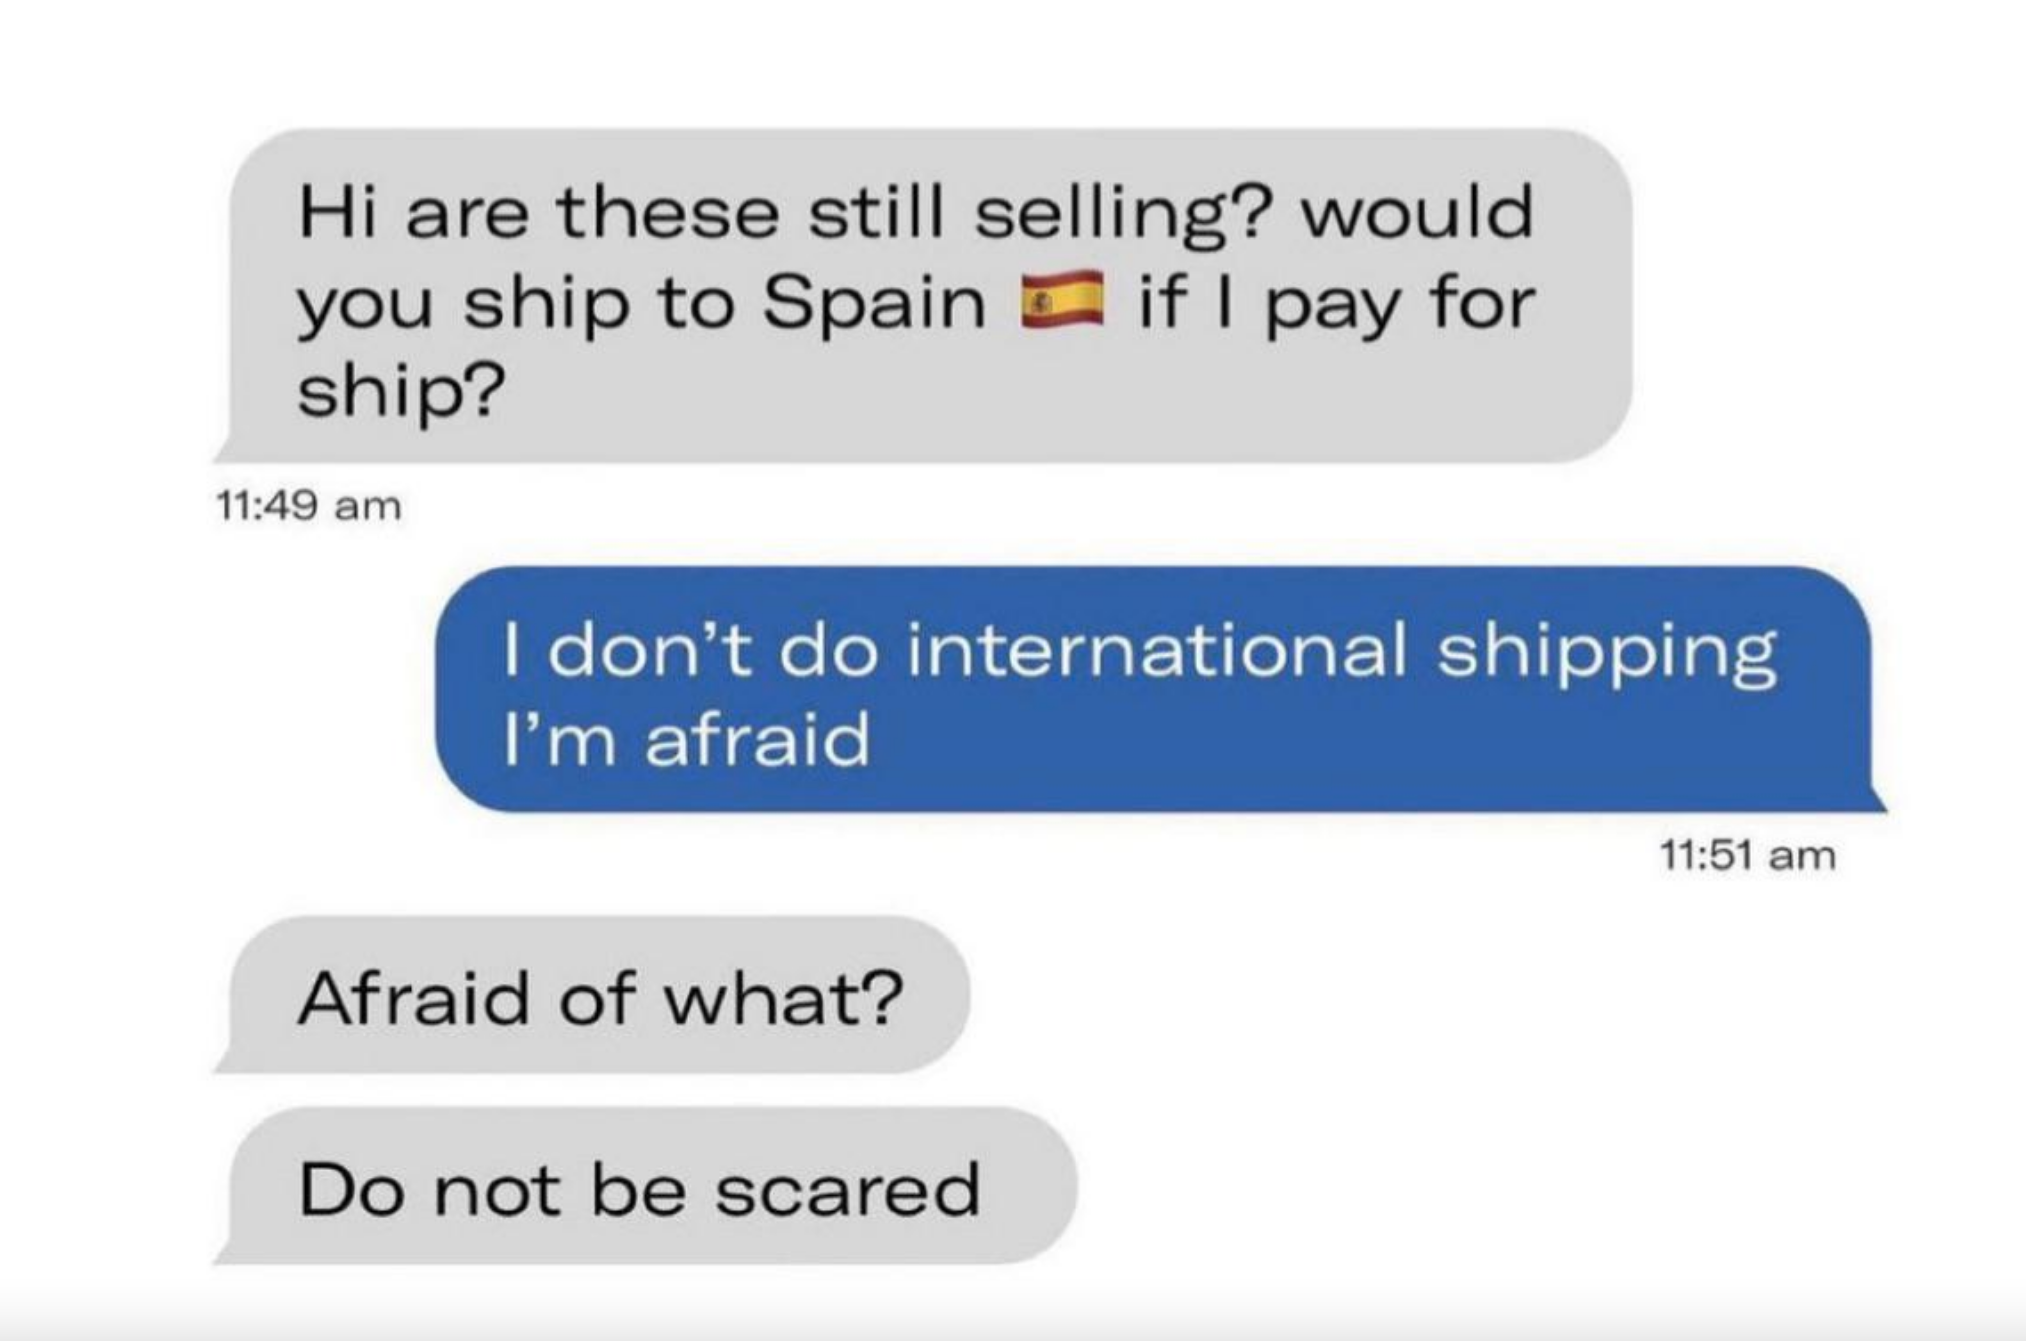 Person asks if seller would ship go Spain, and seller says &quot;I don&#x27;t do international shipping I&#x27;m afraid&quot; and person says &quot;Afraid of what? Do not be scared&quot;